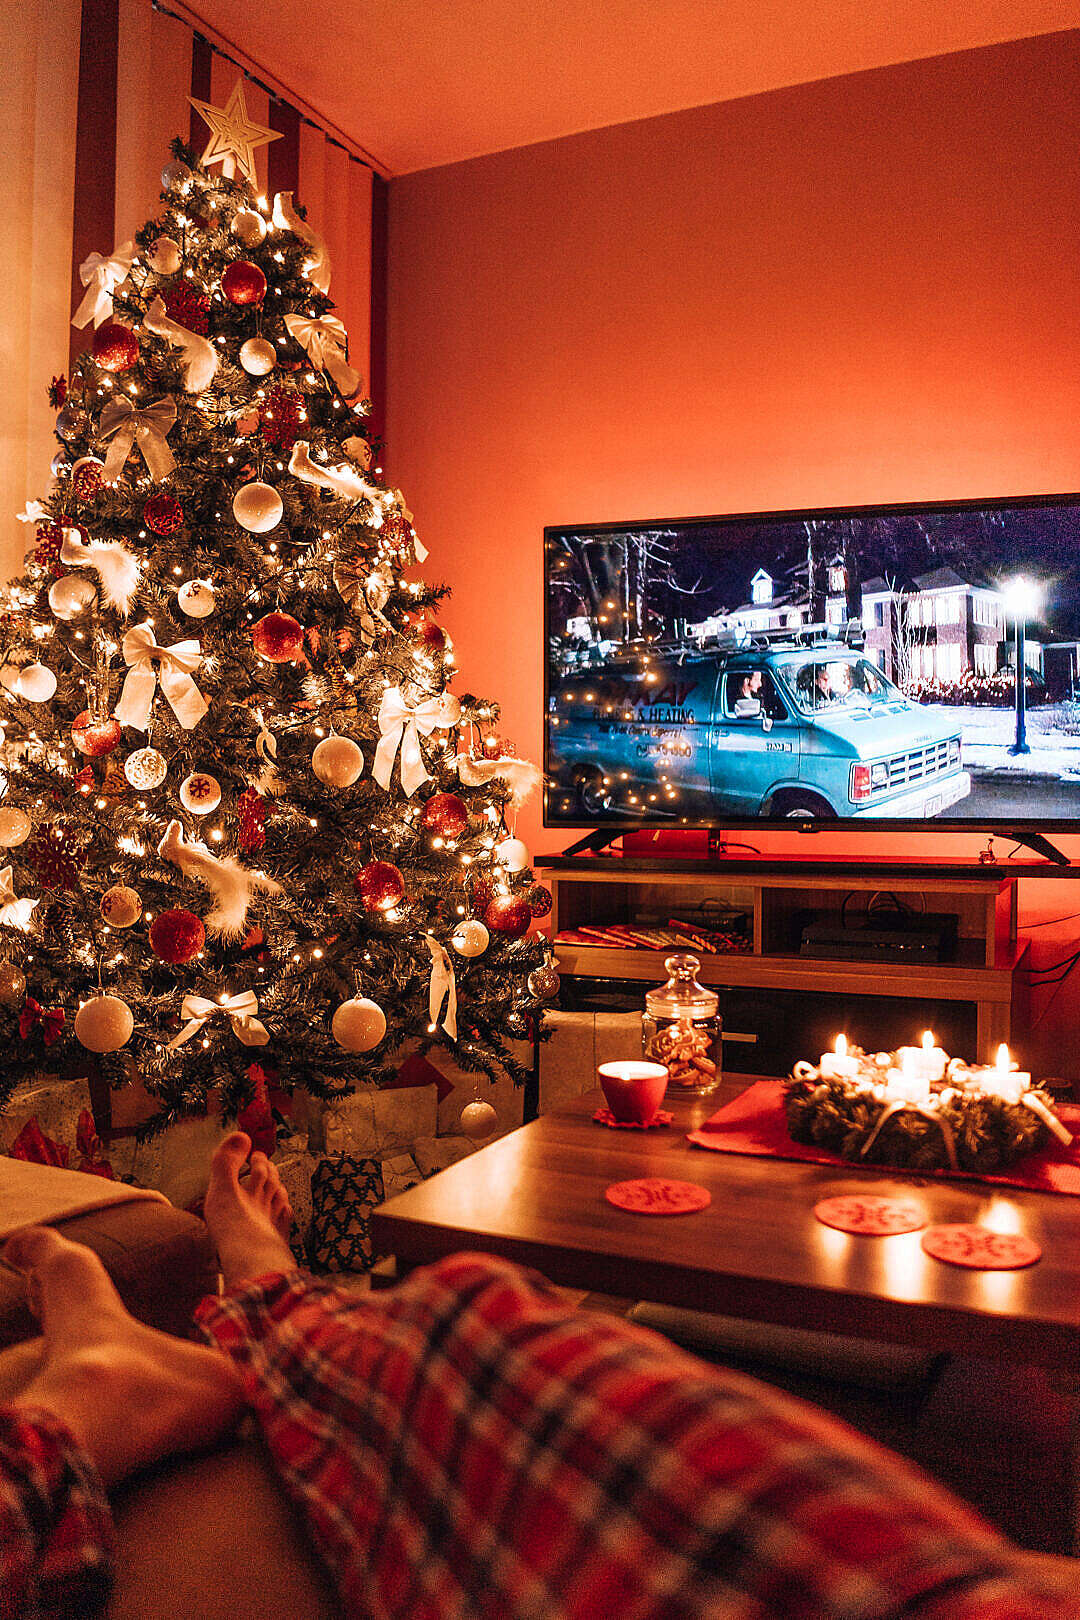 Download Man Relaxing in a Living Room and Watching a Christmas Movie in the Evening FREE Stock Photo